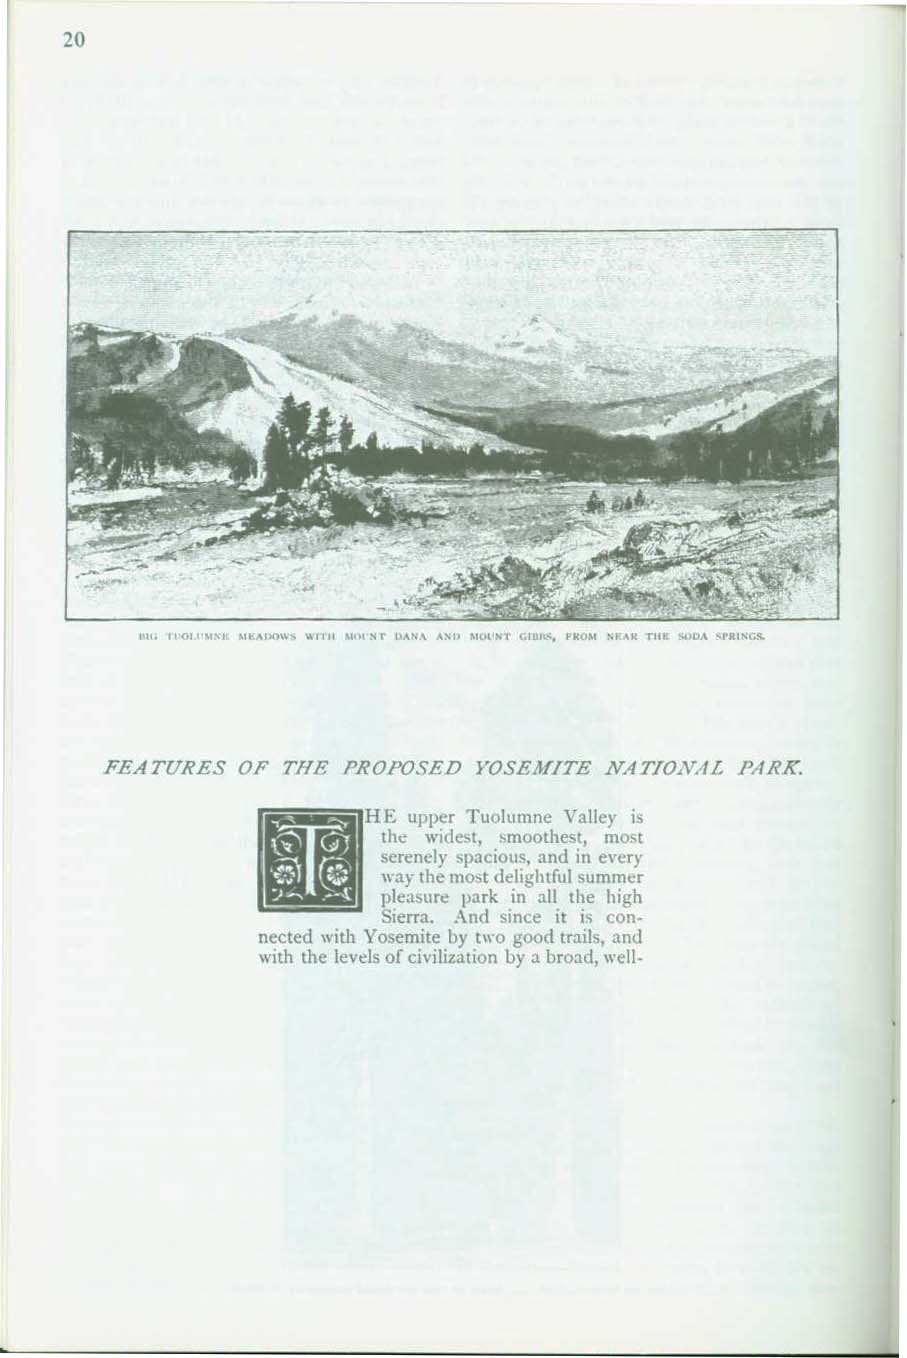 The Proposed Yosemite National Park--treasures & features, 1890. vis0003h